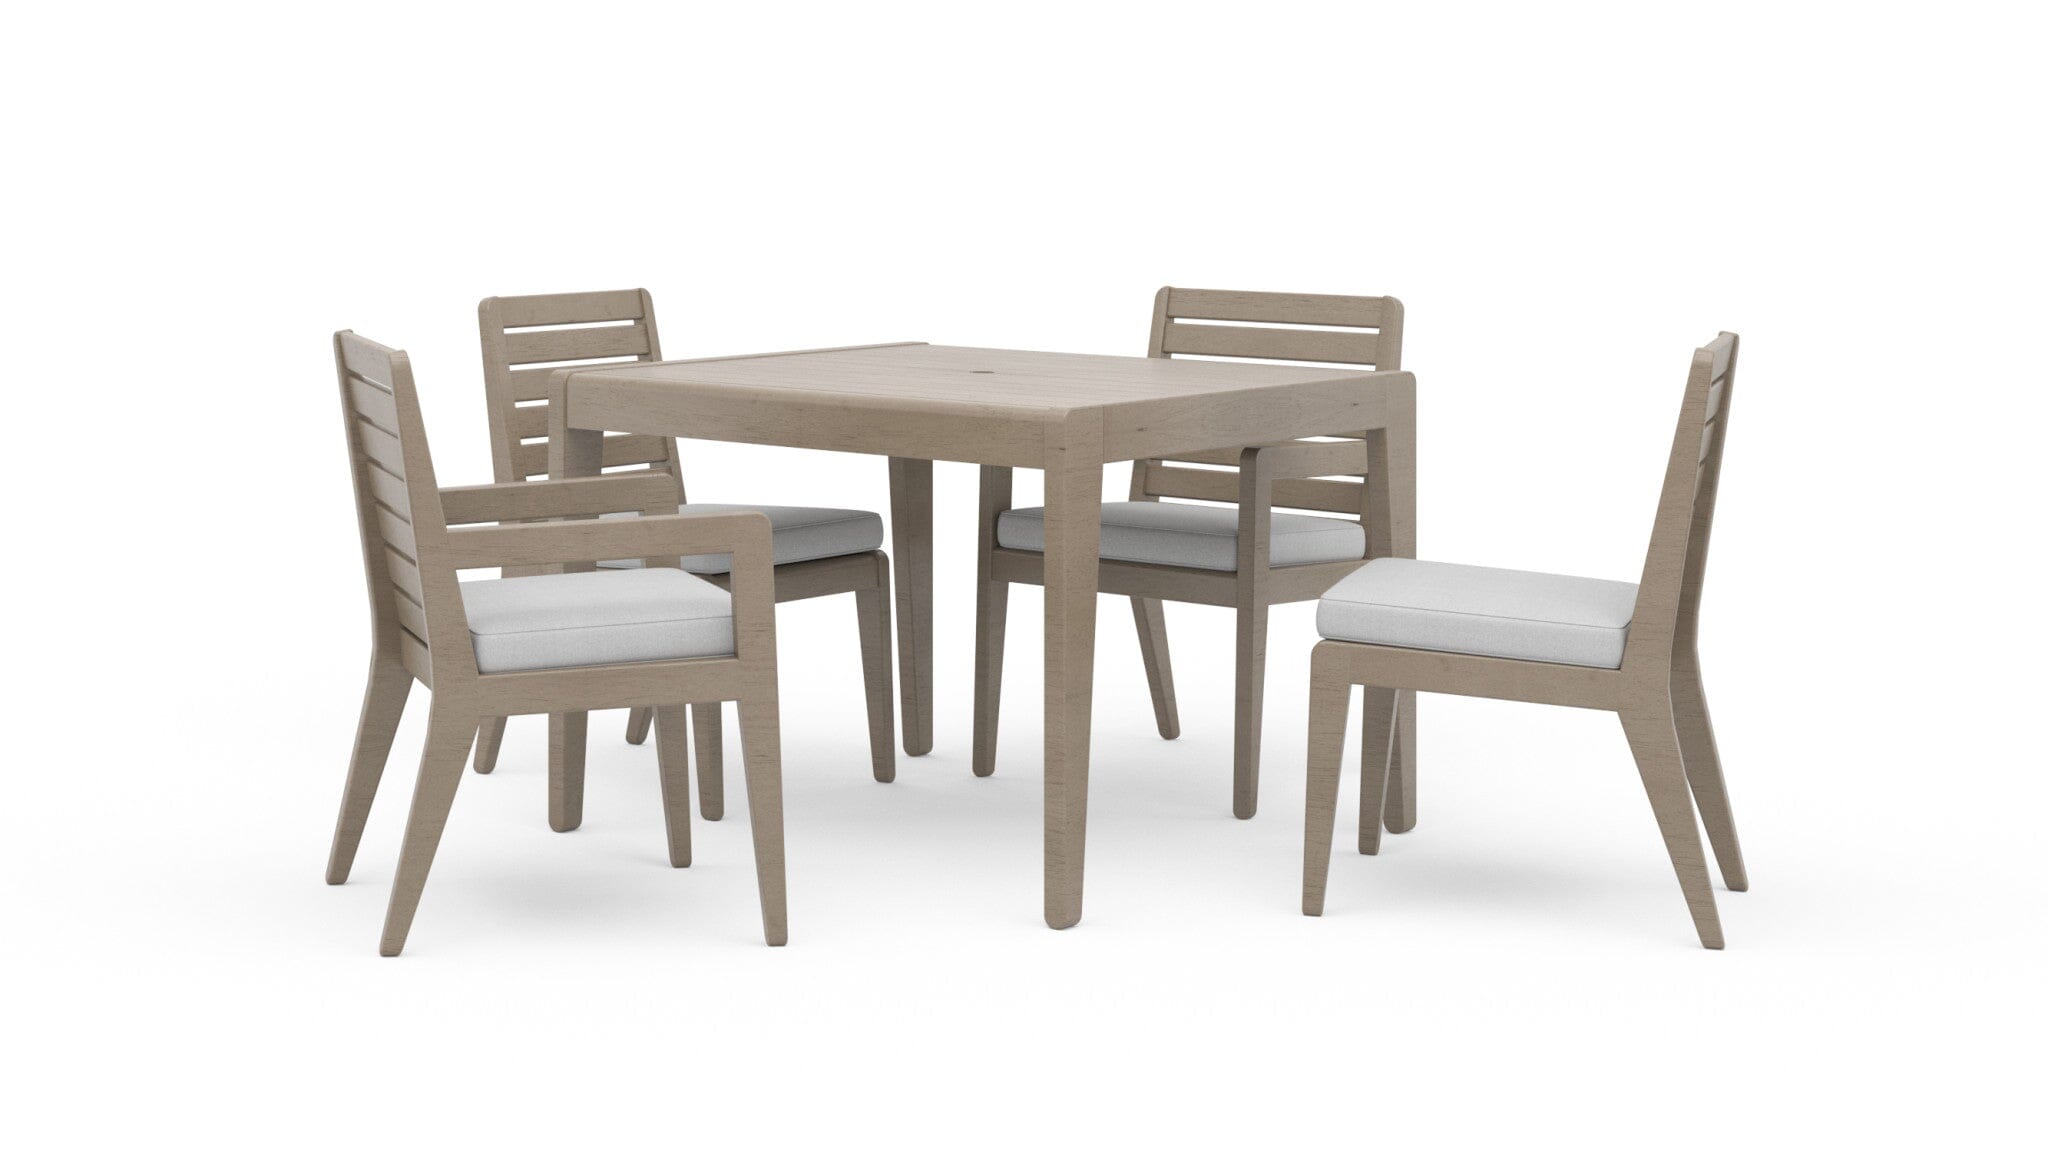 Transitional Outdoor Dining Table and Four Chairs By Sustain Outdoor Dining Set Sustain